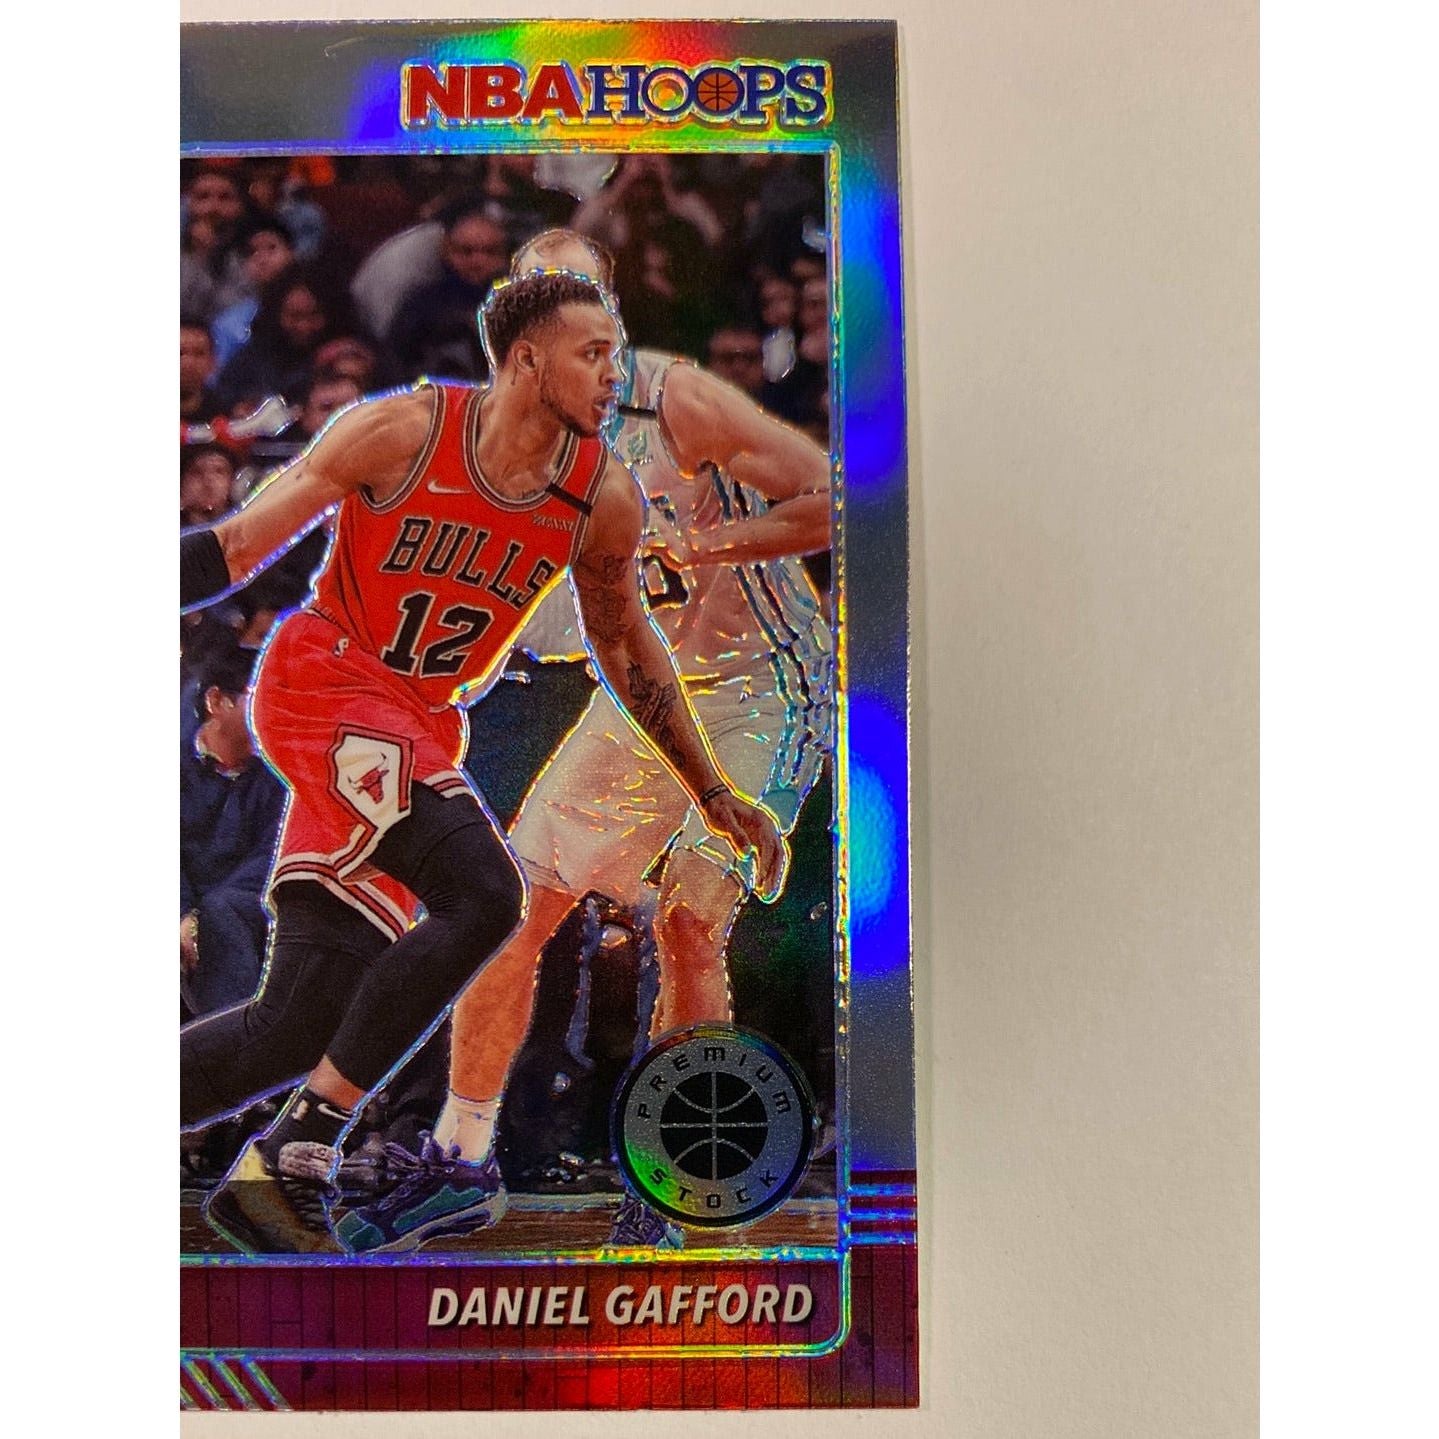  2019-20 Hoops Premium Stock Daniel Gafford Silver Holo Prizm RC  Local Legends Cards & Collectibles